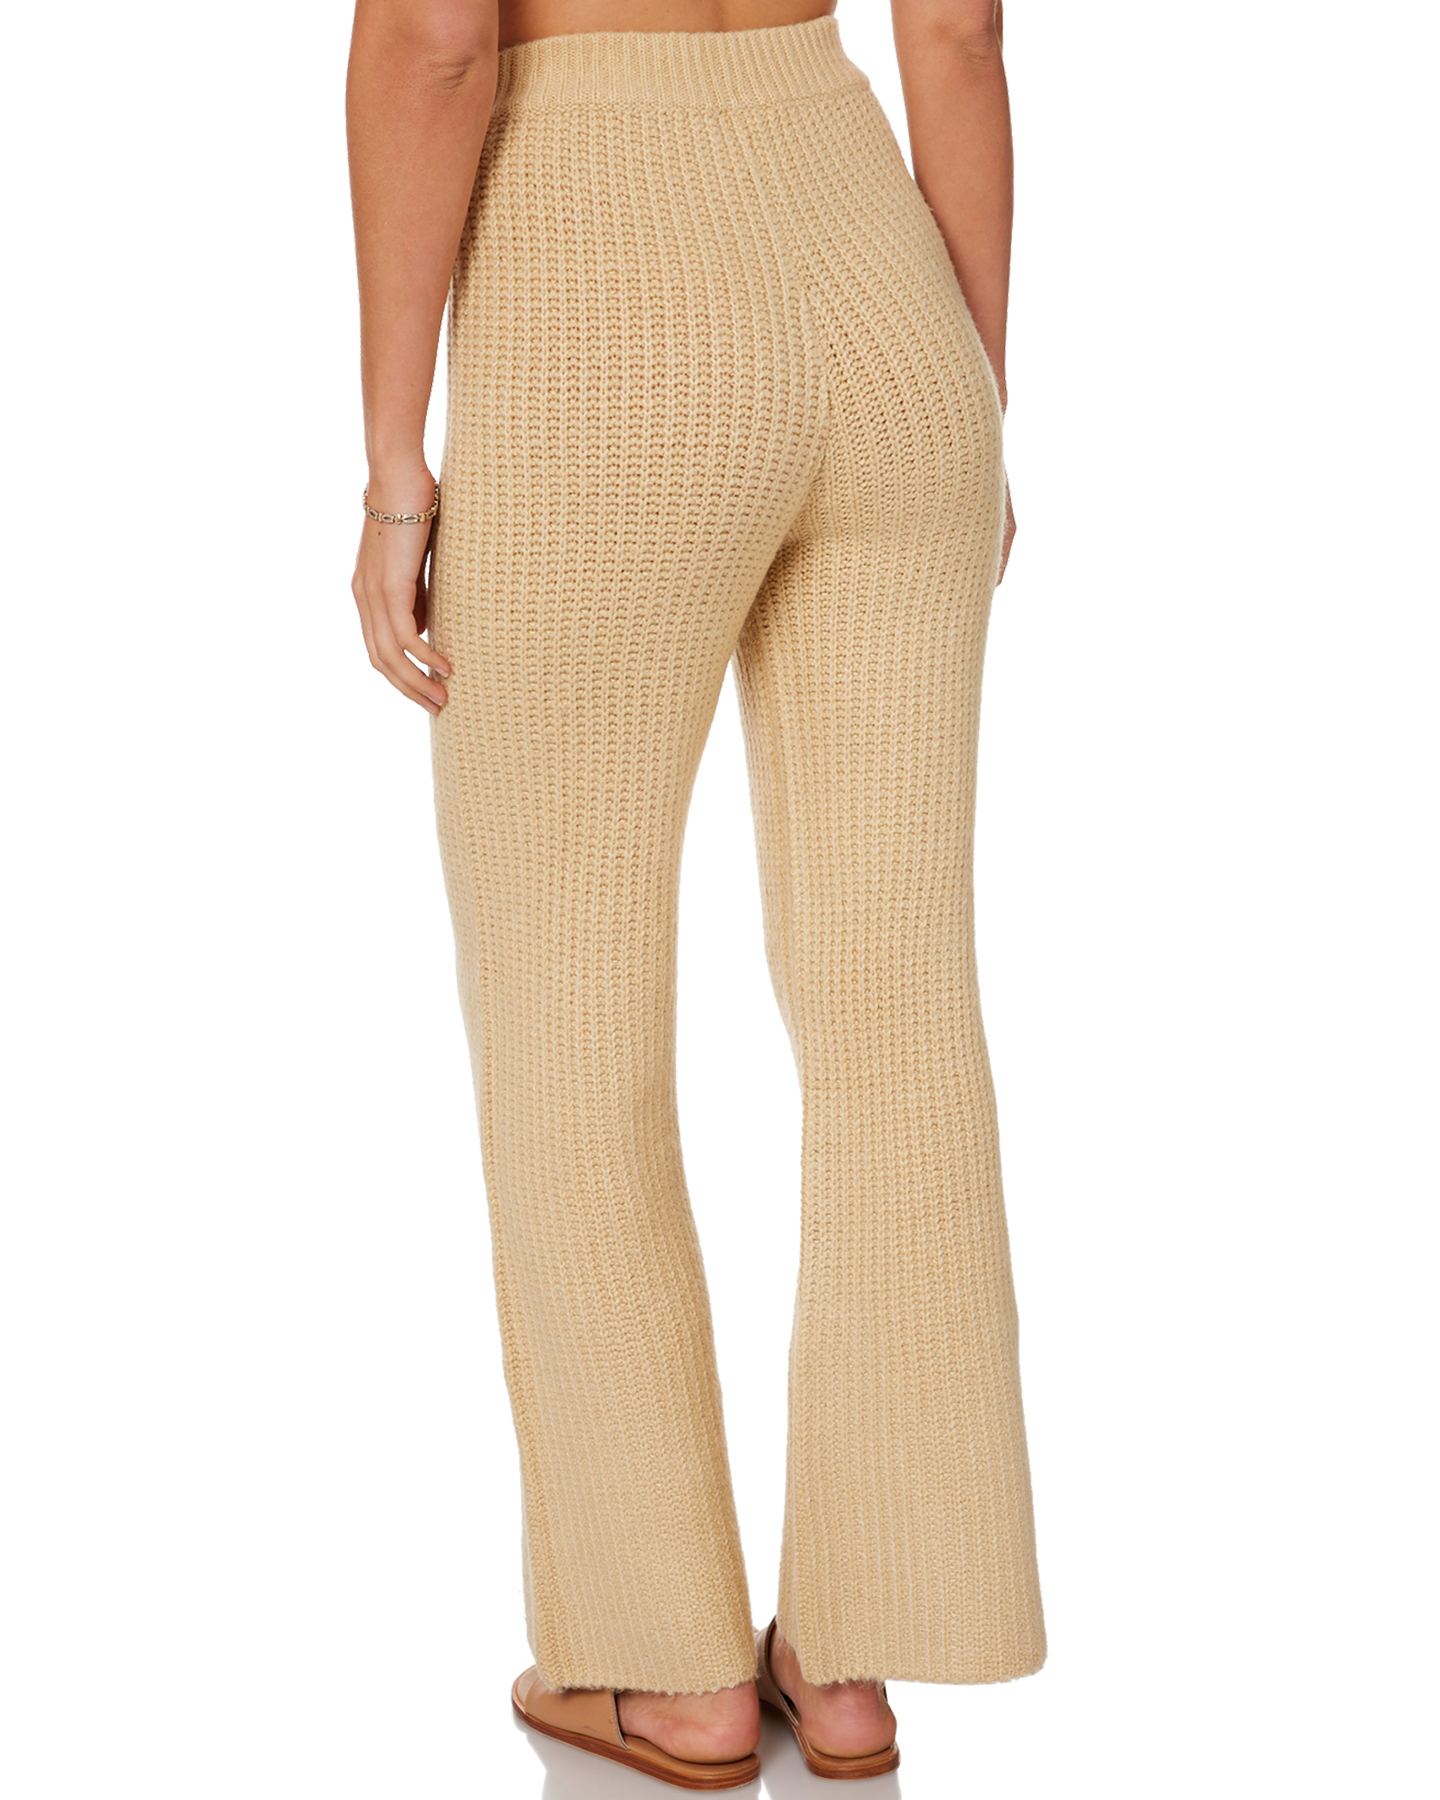 Zulu And Zephyr Rest Knit Pant - Tan | SurfStitch